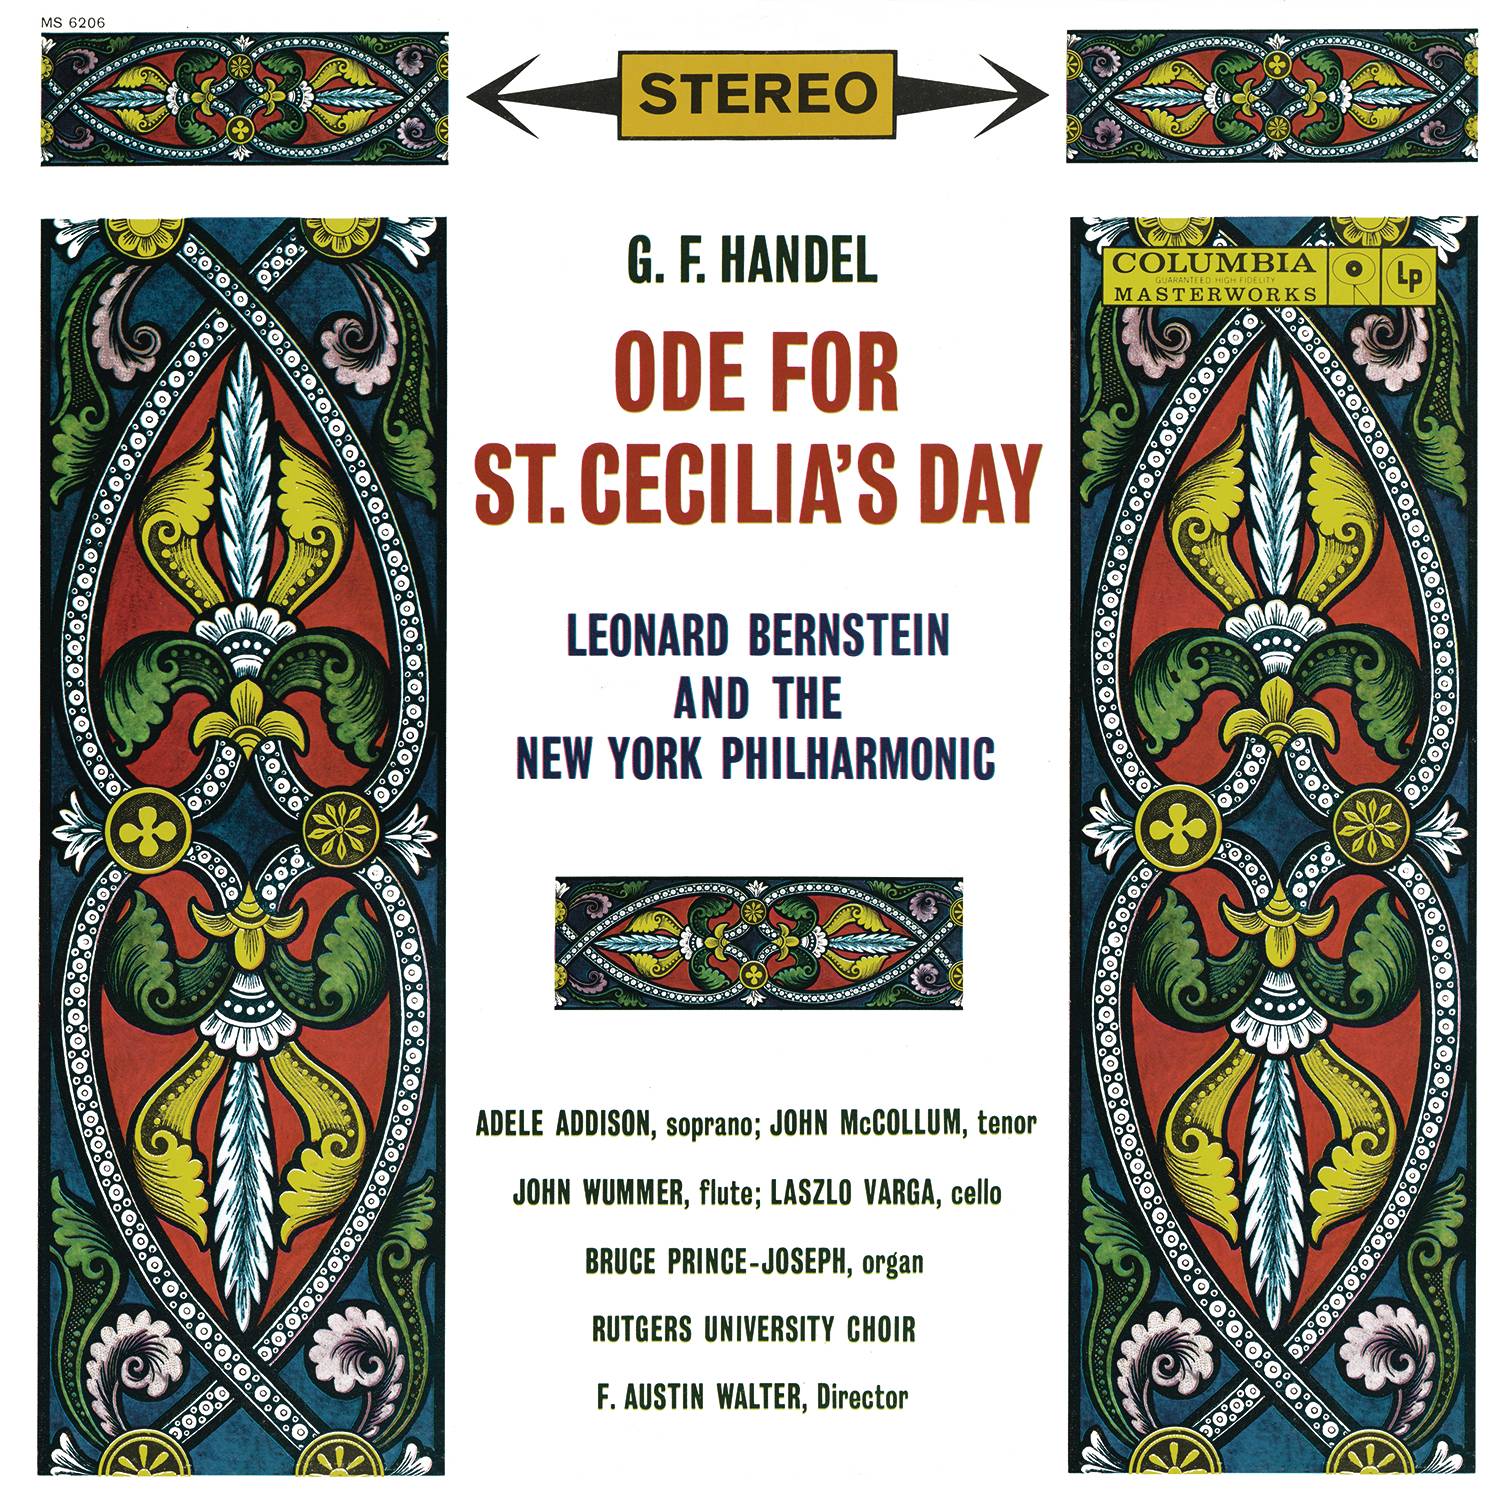 Ode For St. Cecilia's Day, HWV 76:No. 9, Orpheus could lead the savage race (Aria)